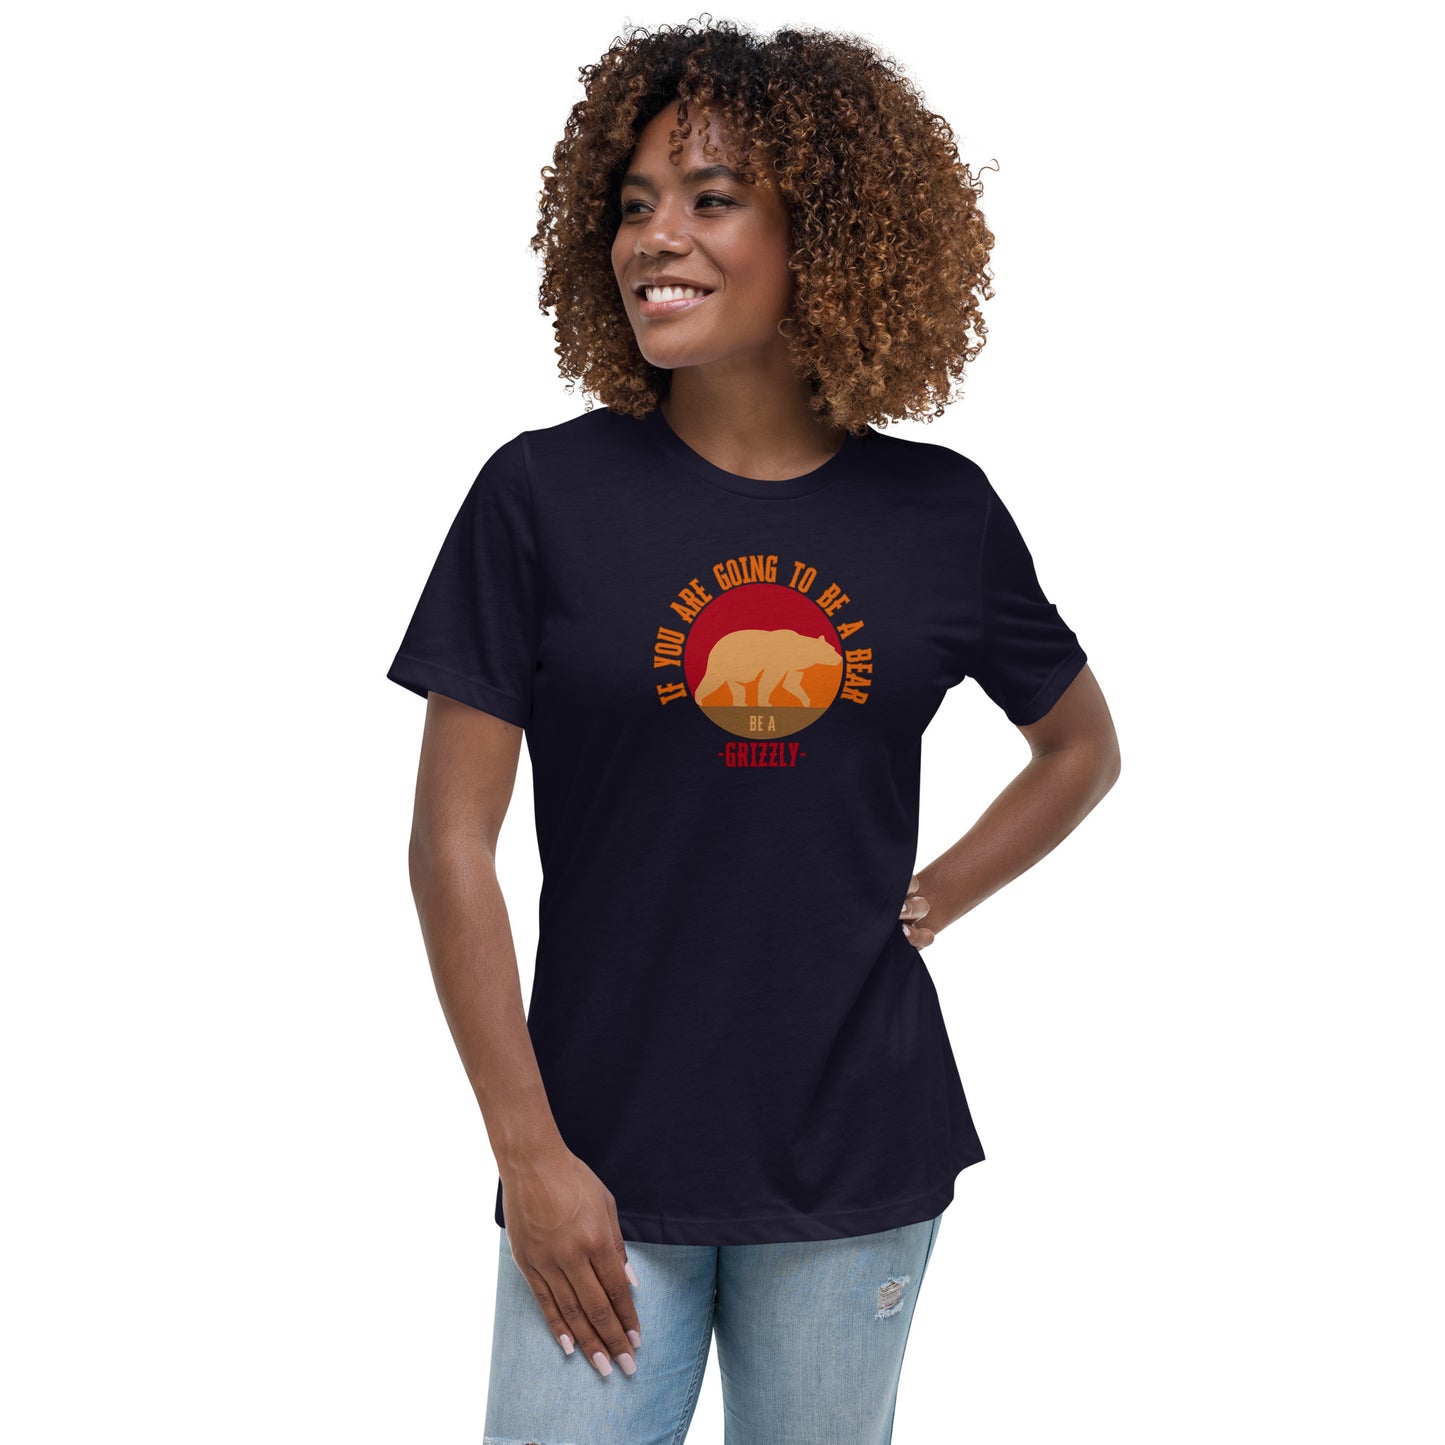 If You Are Going To Be A Bear Be A Grizzly Women's Relaxed T-Shirt